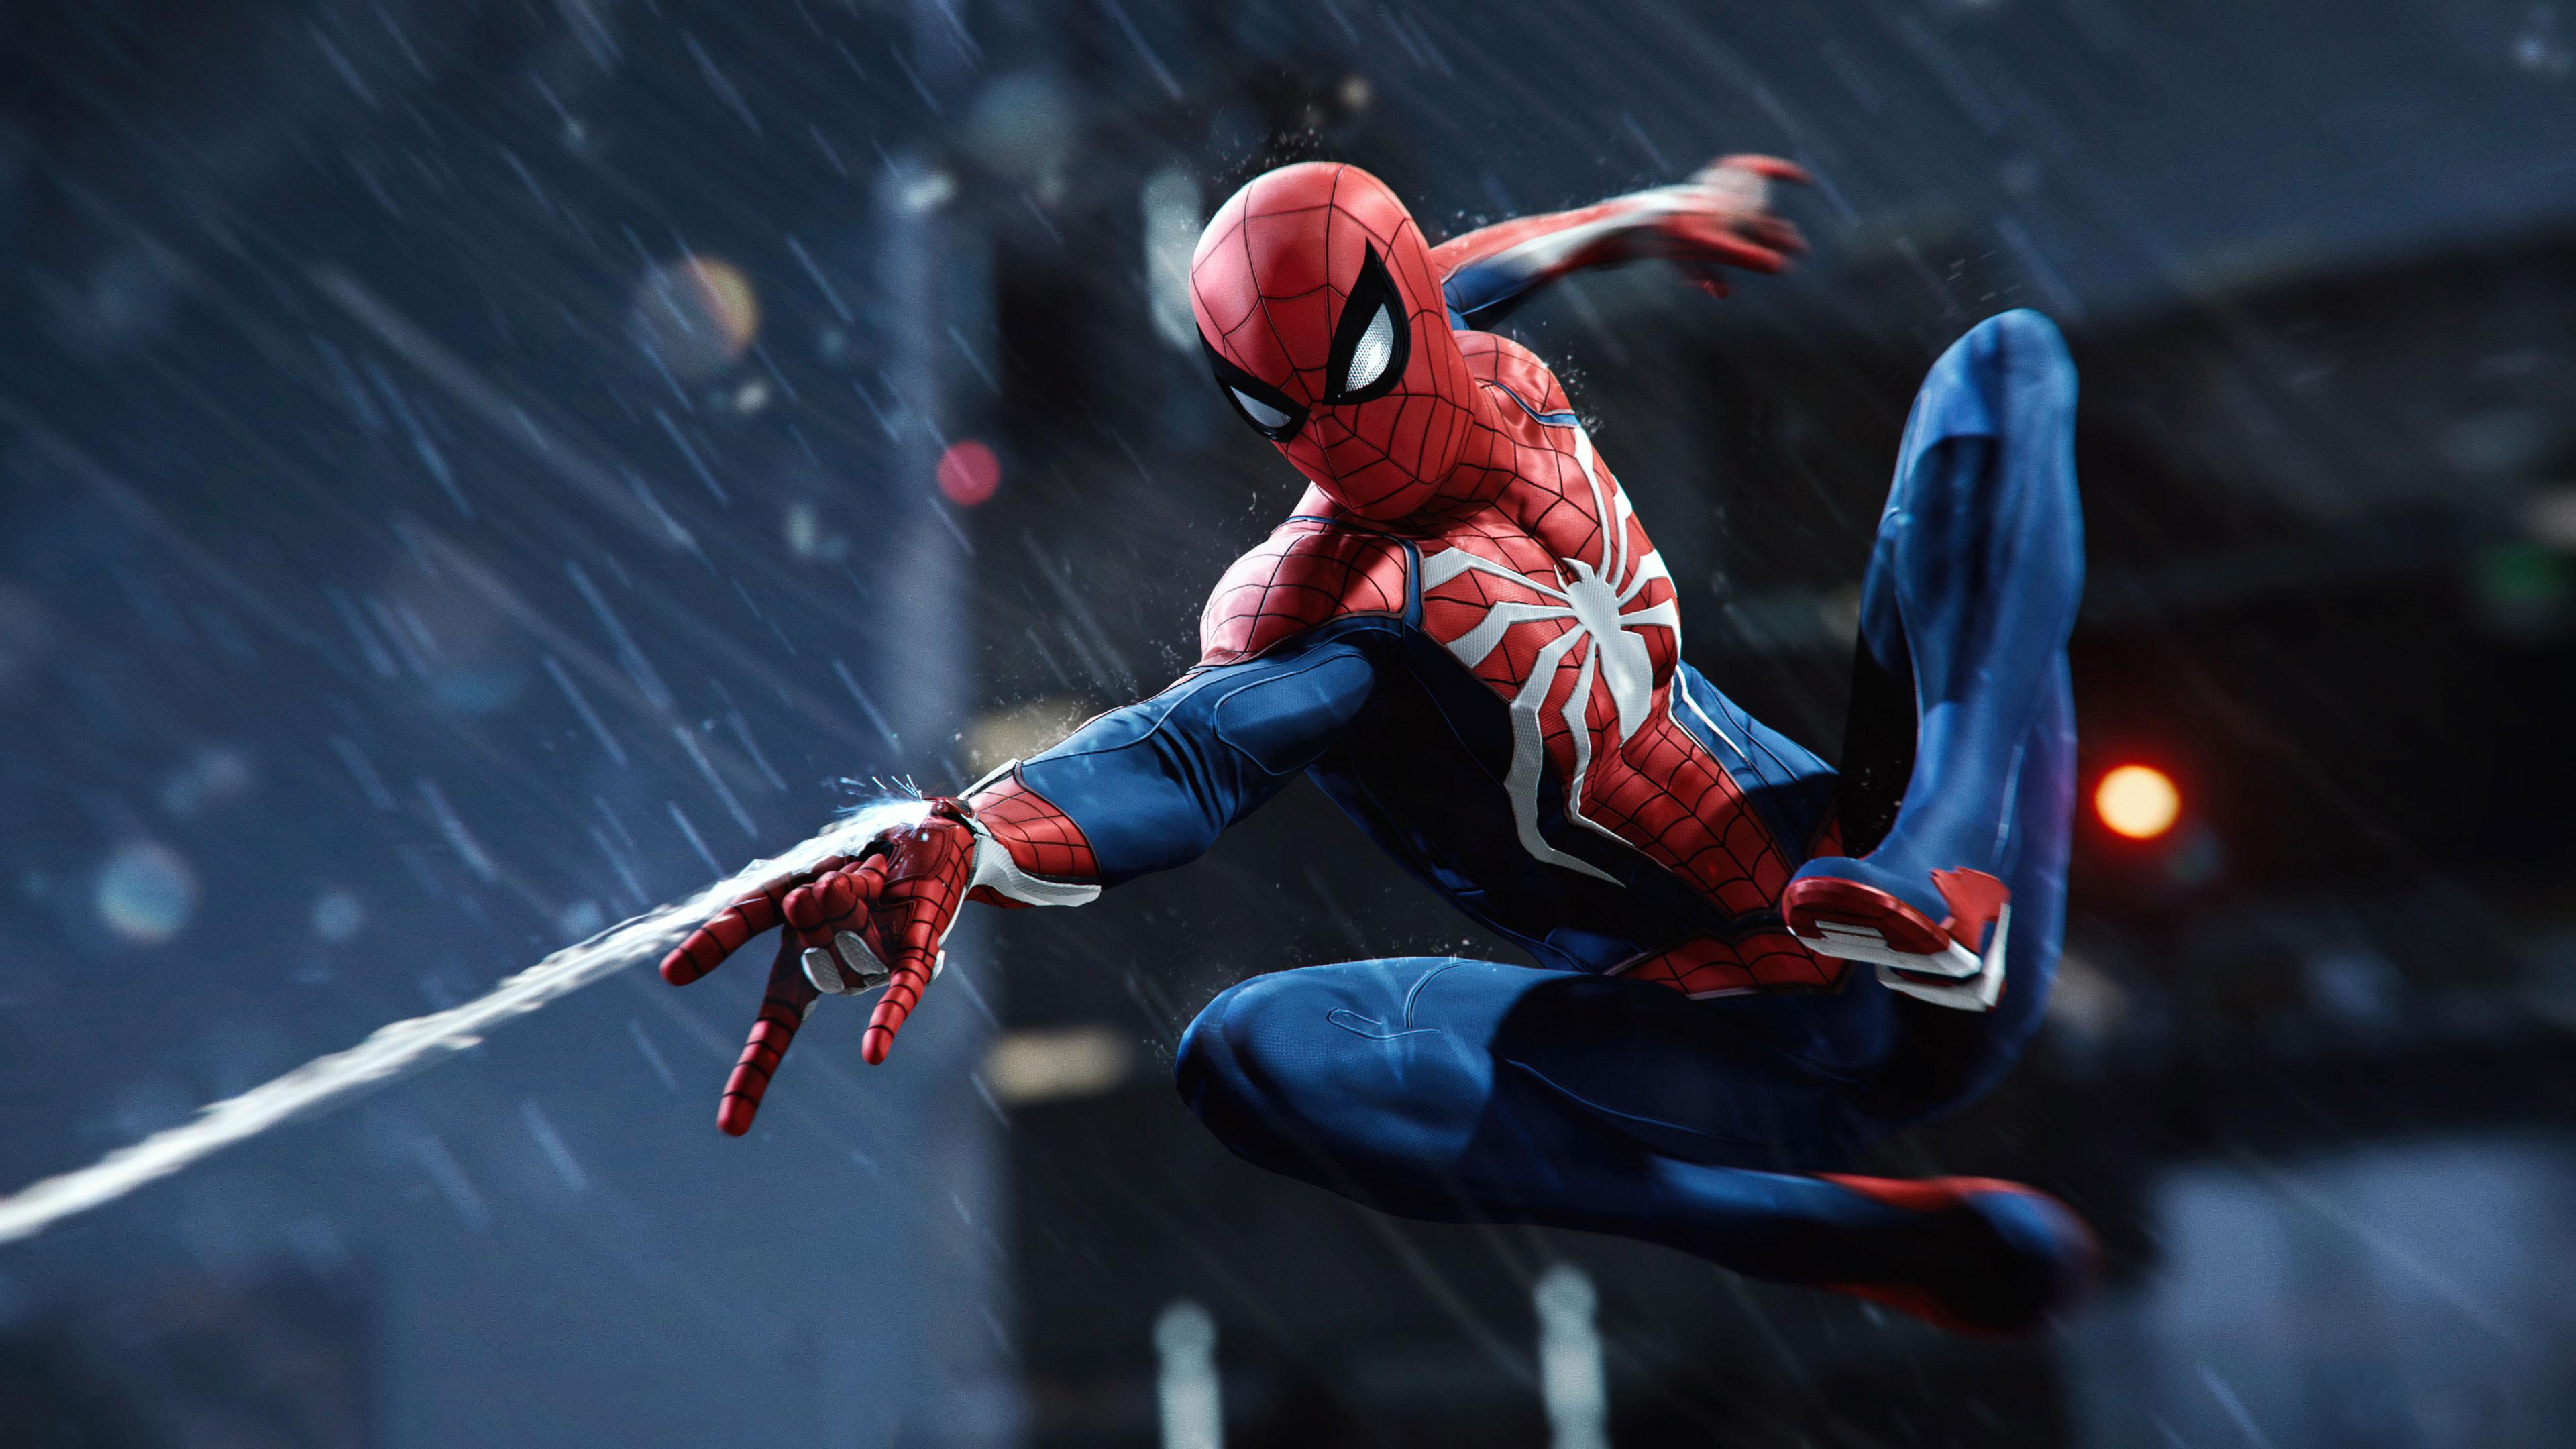 3840 x 2160 · jpeg - Spiderman PS4 2018 E3, HD Games, 4k Wallpapers, Images, Backgrounds ...